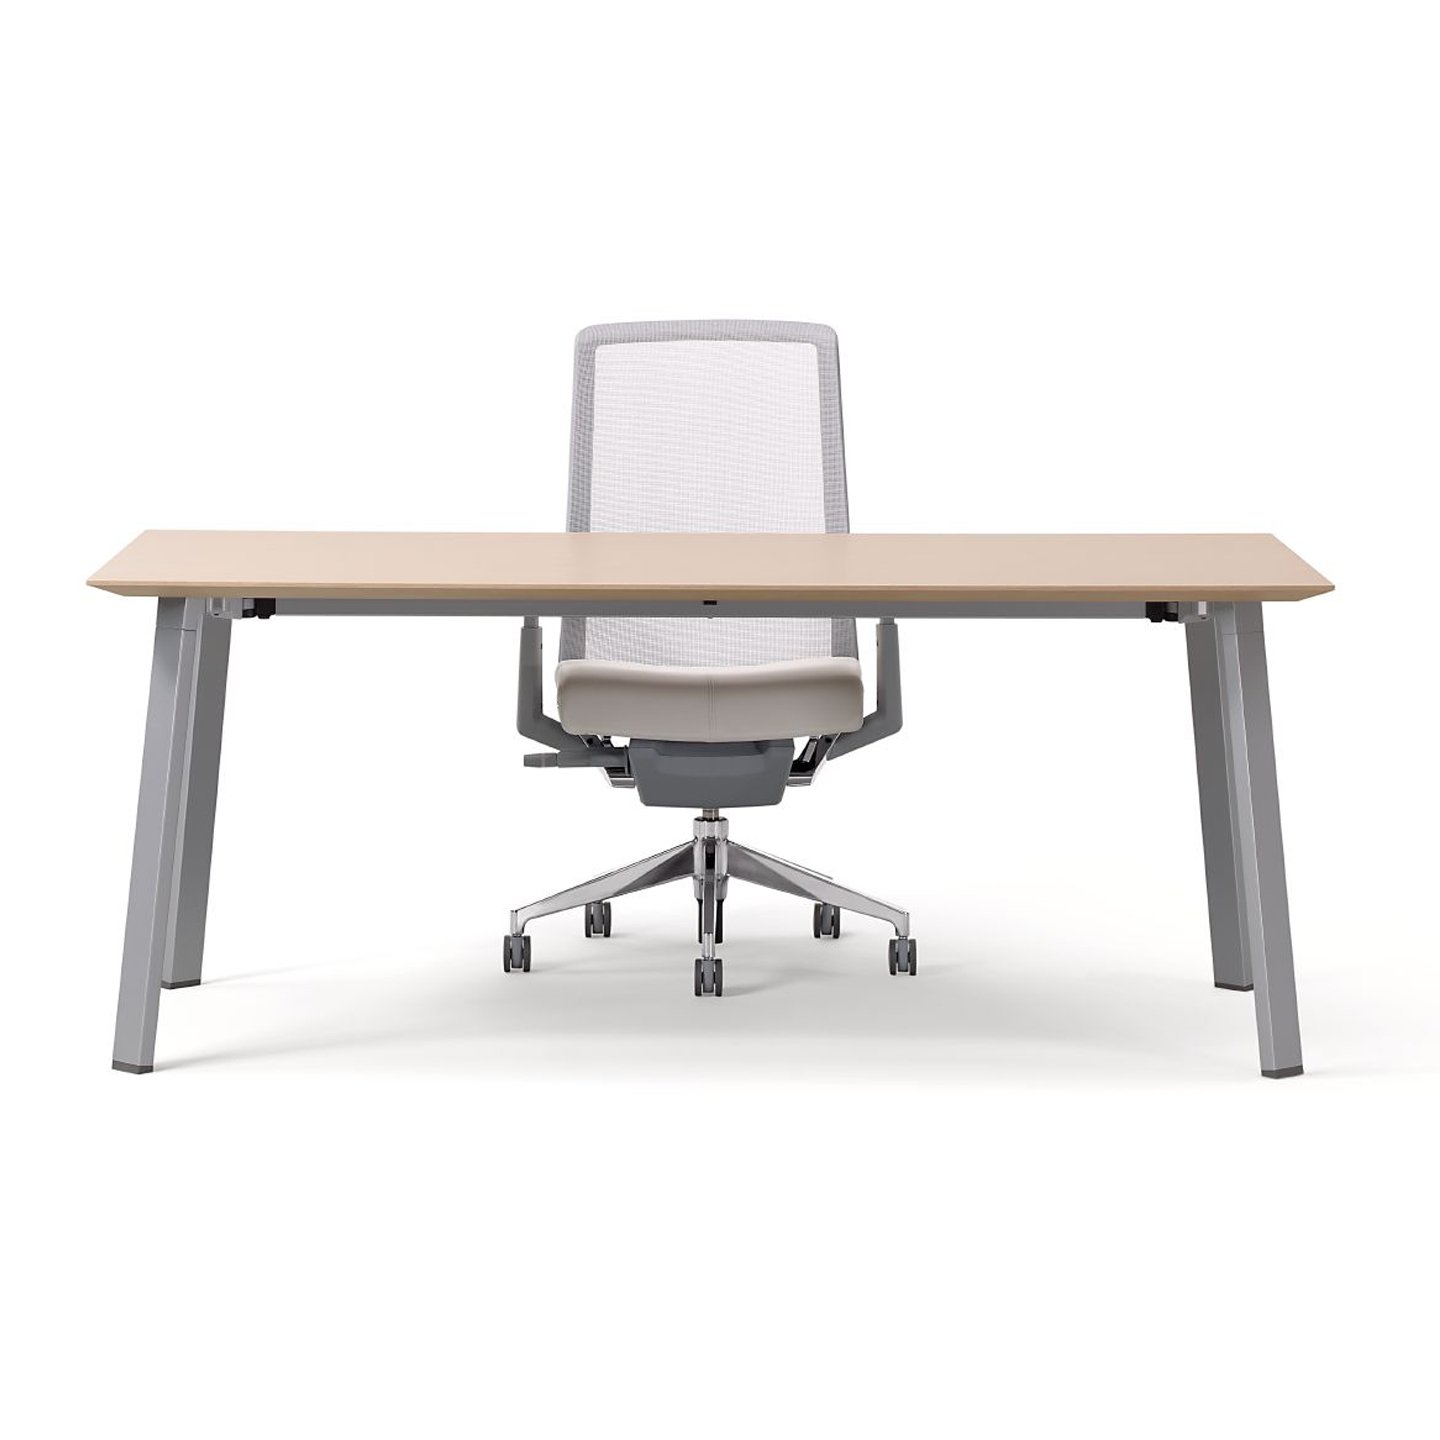 Haworth Reside WOrkspace with laminate surface and chair behind desk